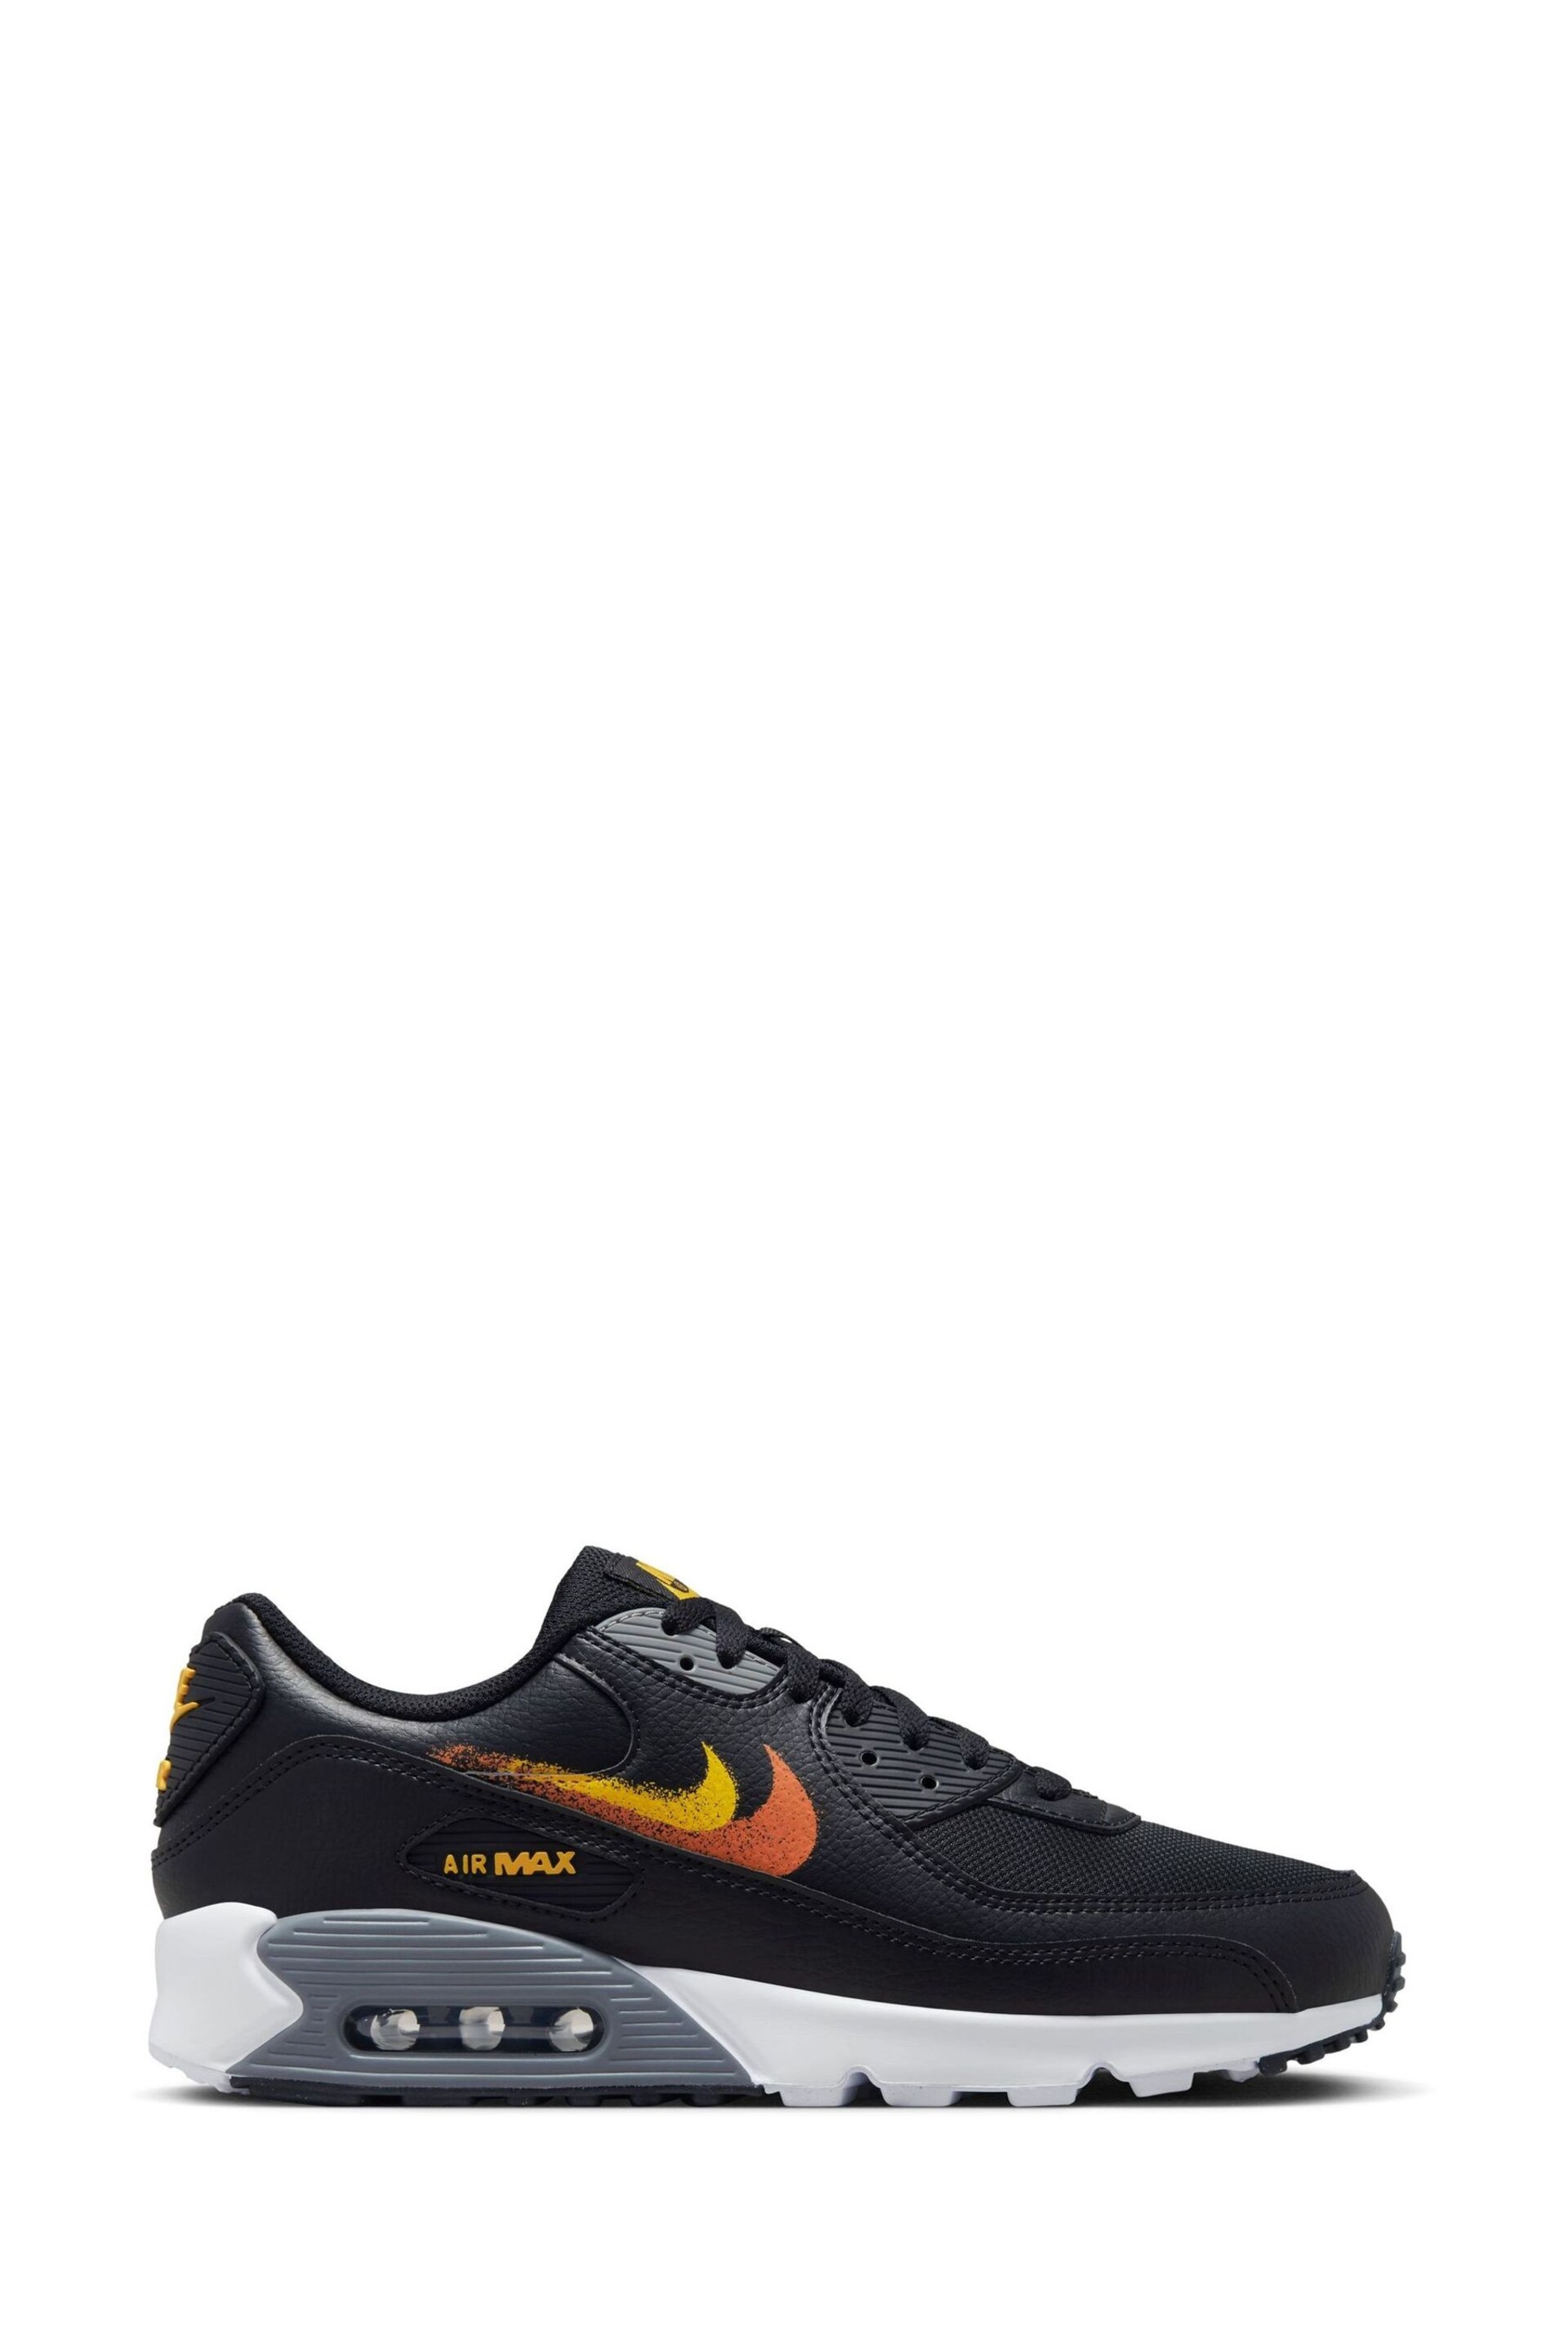 Nike Black/Gold Air Max 90 Trainers - Image 1 of 10